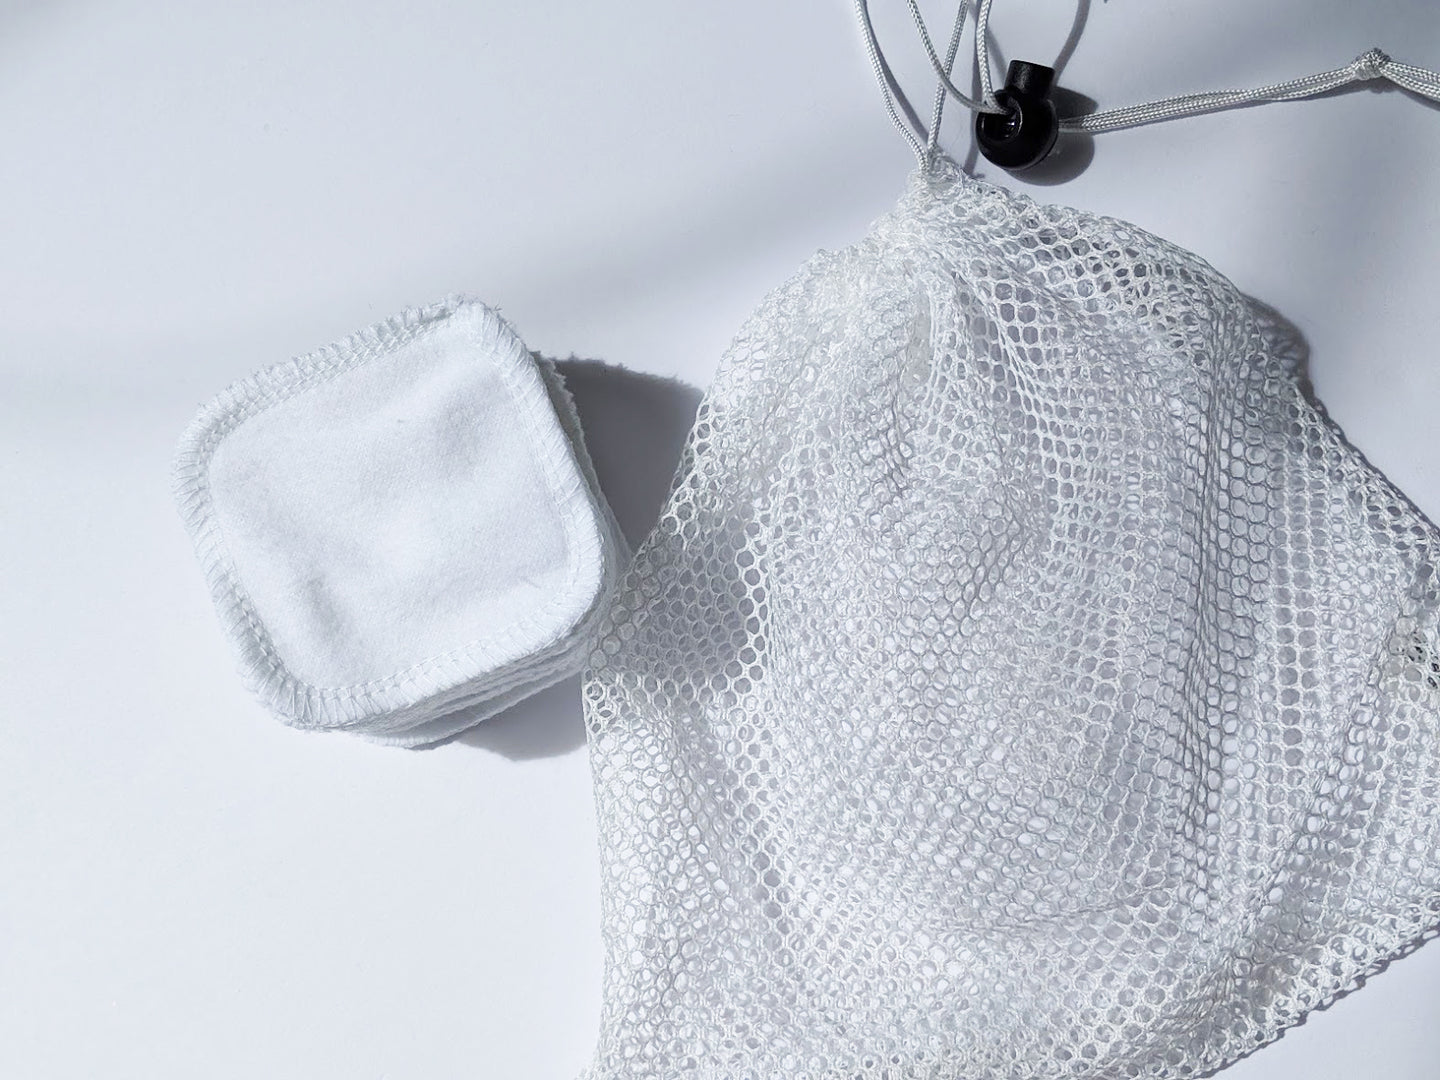 a mesh laundry bag next to a stack of facial rounds. The mesh laundry bag has a pull tab to be able to close fully.